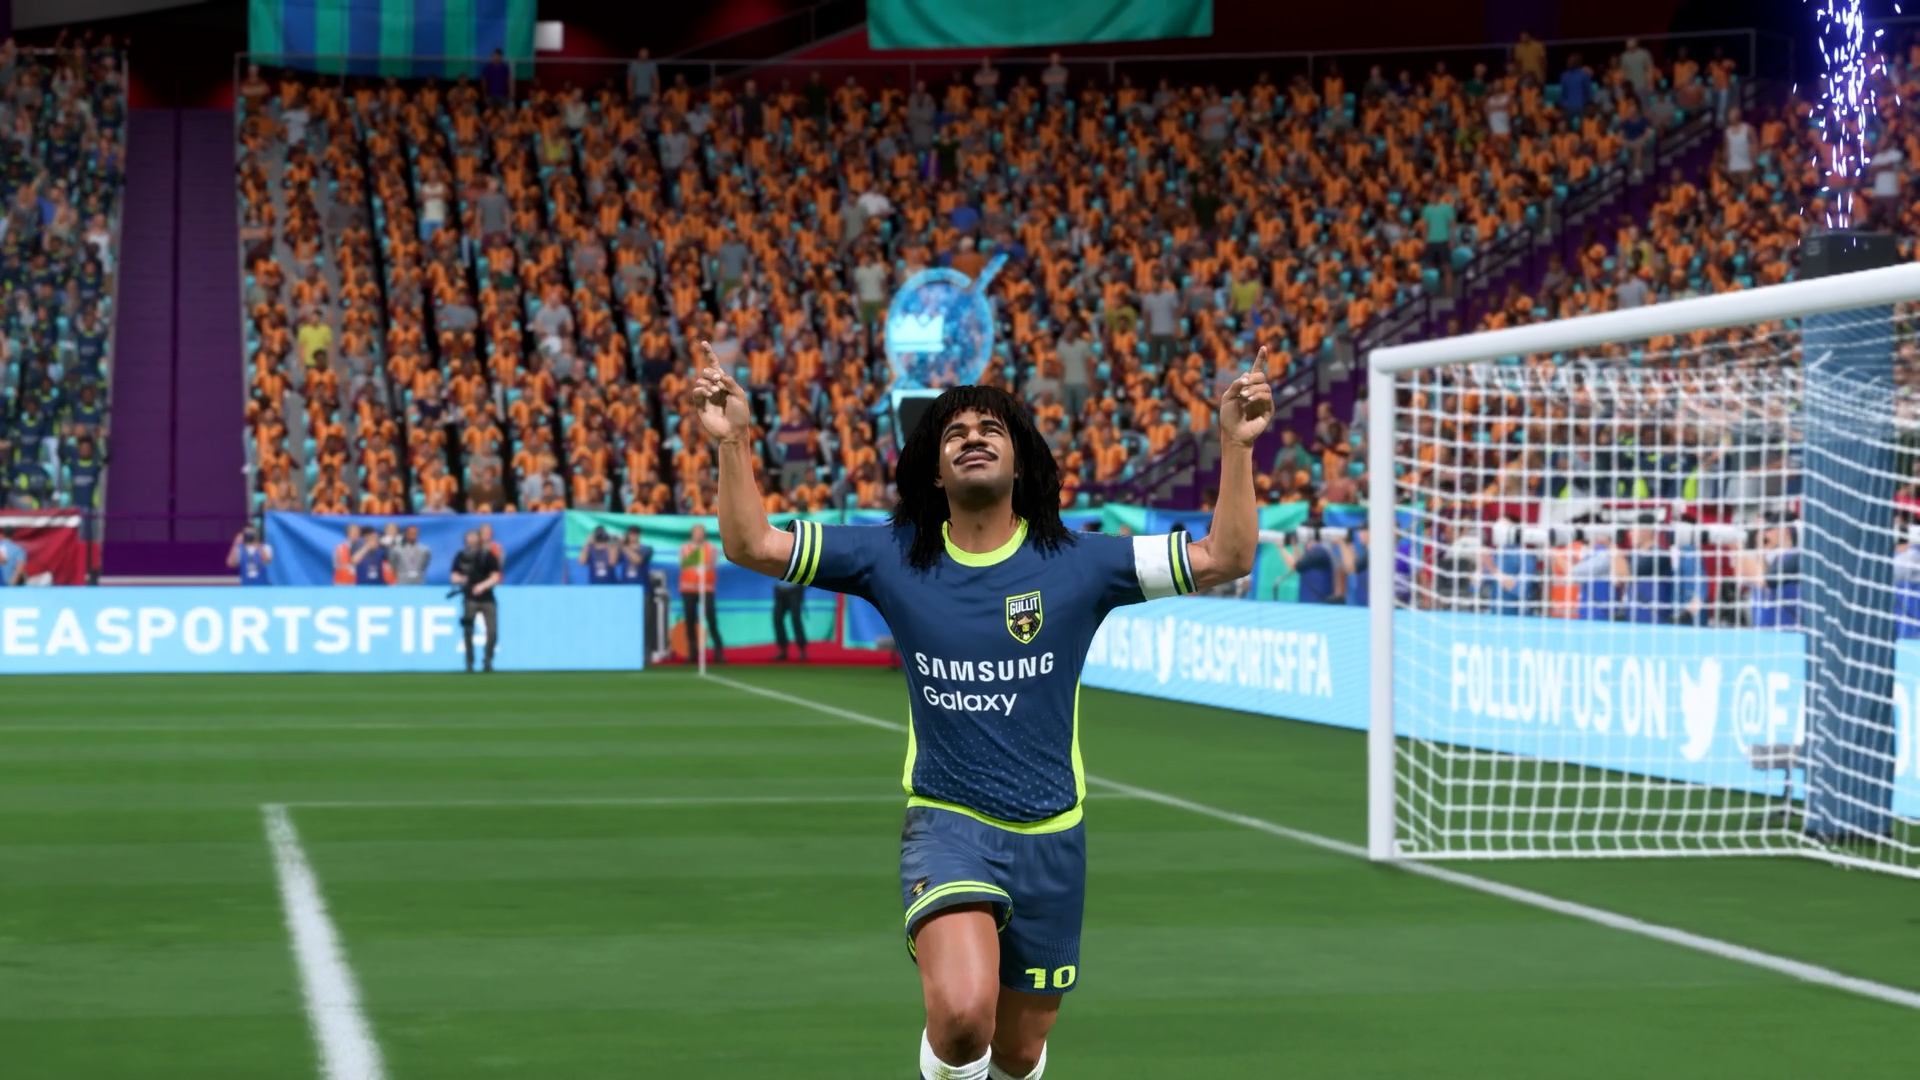 This in-game image features Ruud Gullit in a TG.NIP kit in FIFA 22